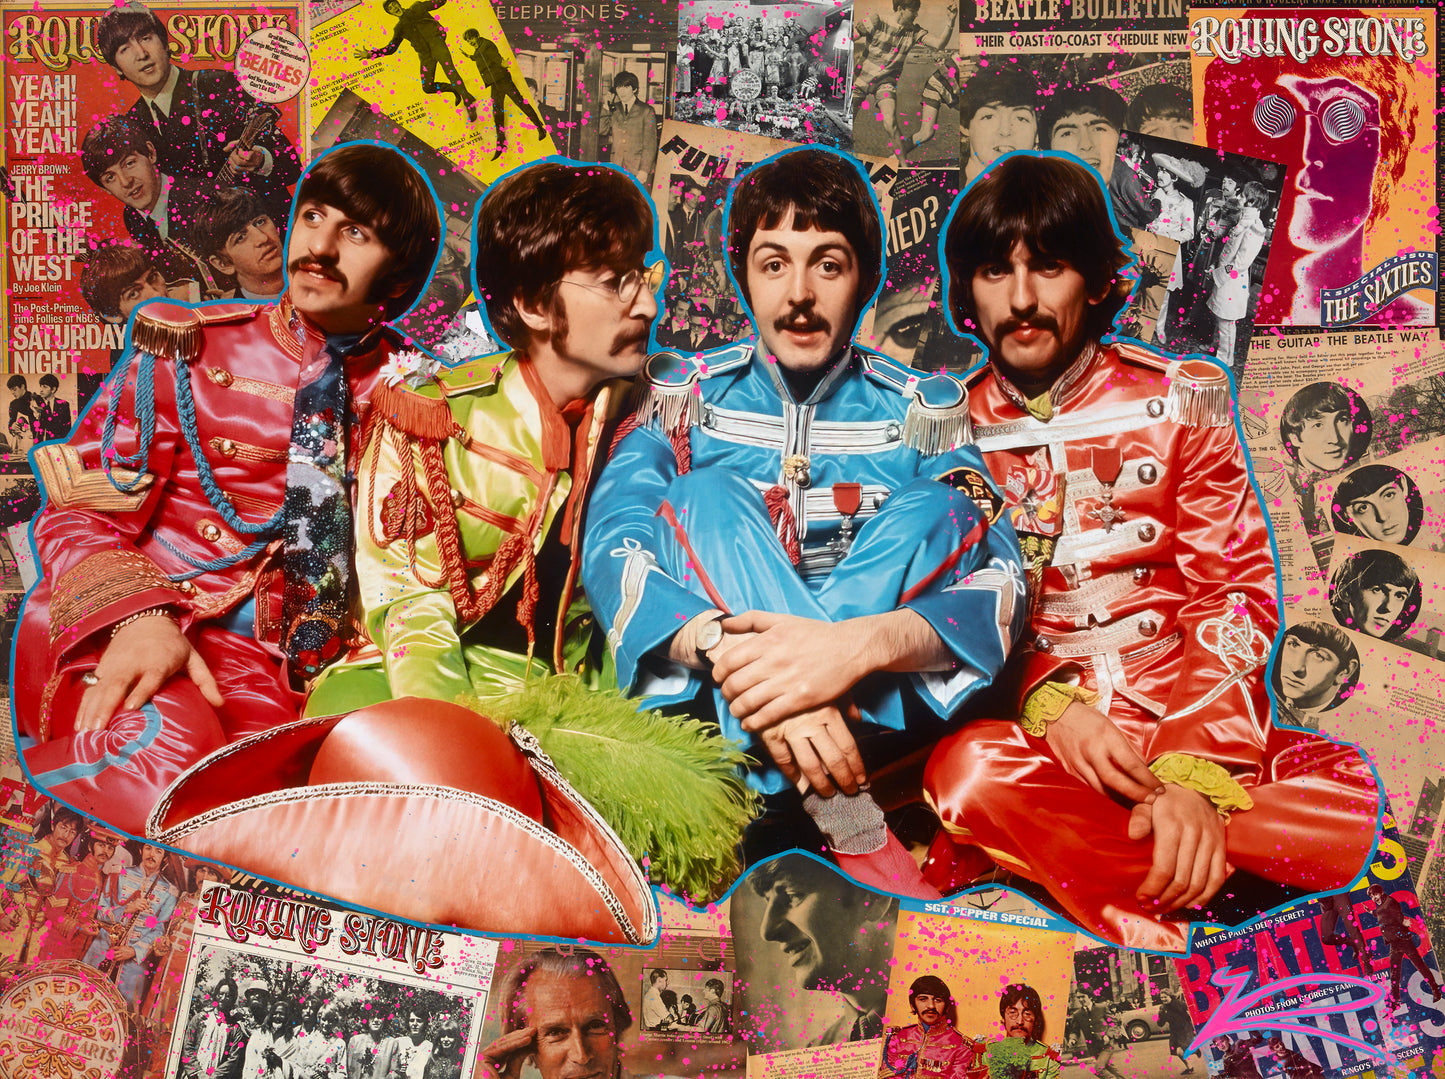 “Sergeant Peppers, lonely hearts, club band.”